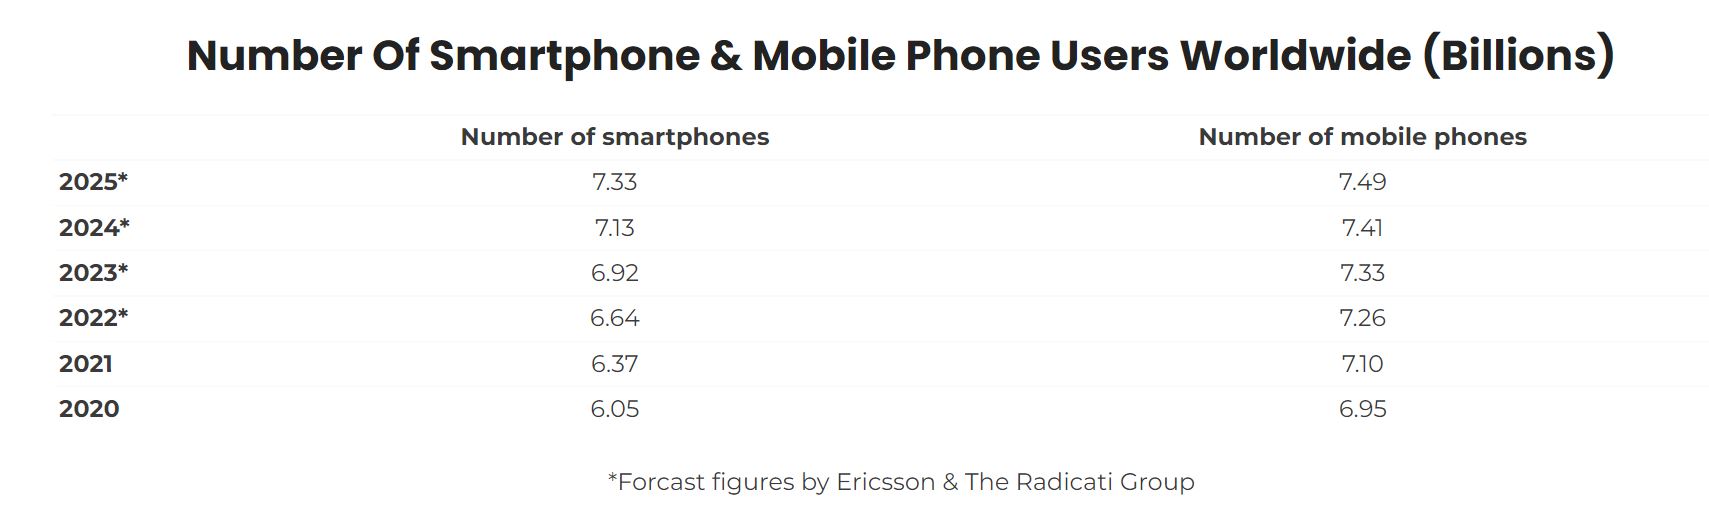 Number of Smartphone & Mobile Phone Users Worldwide in Billions